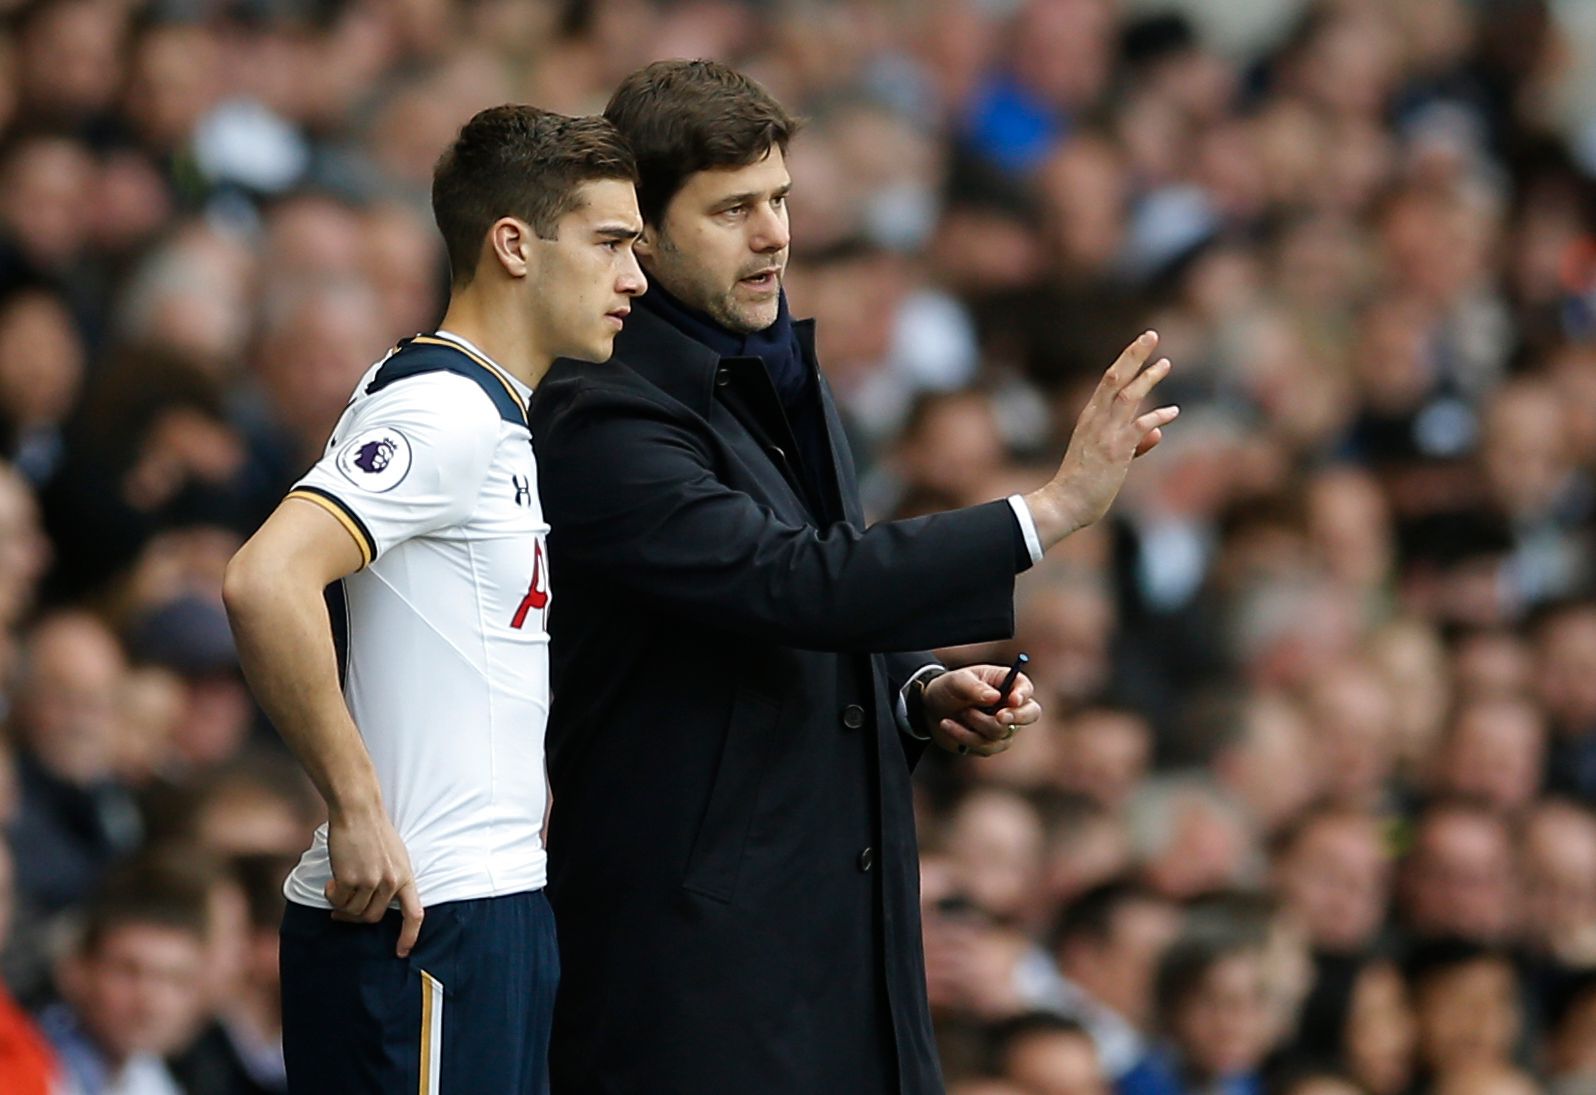 Britain Soccer Football - Tottenham Hotspur v Southampton - Premier League - White Hart Lane - 19/3/17 Tottenham manager Mauricio Pochettino speaks with Harry Winks before he comes on as a substitute Action Images via Reuters / Andrew Couldridge Livepic EDITORIAL USE ONLY. No use with unauthorized audio, video, data, fixture lists, club/league logos or 